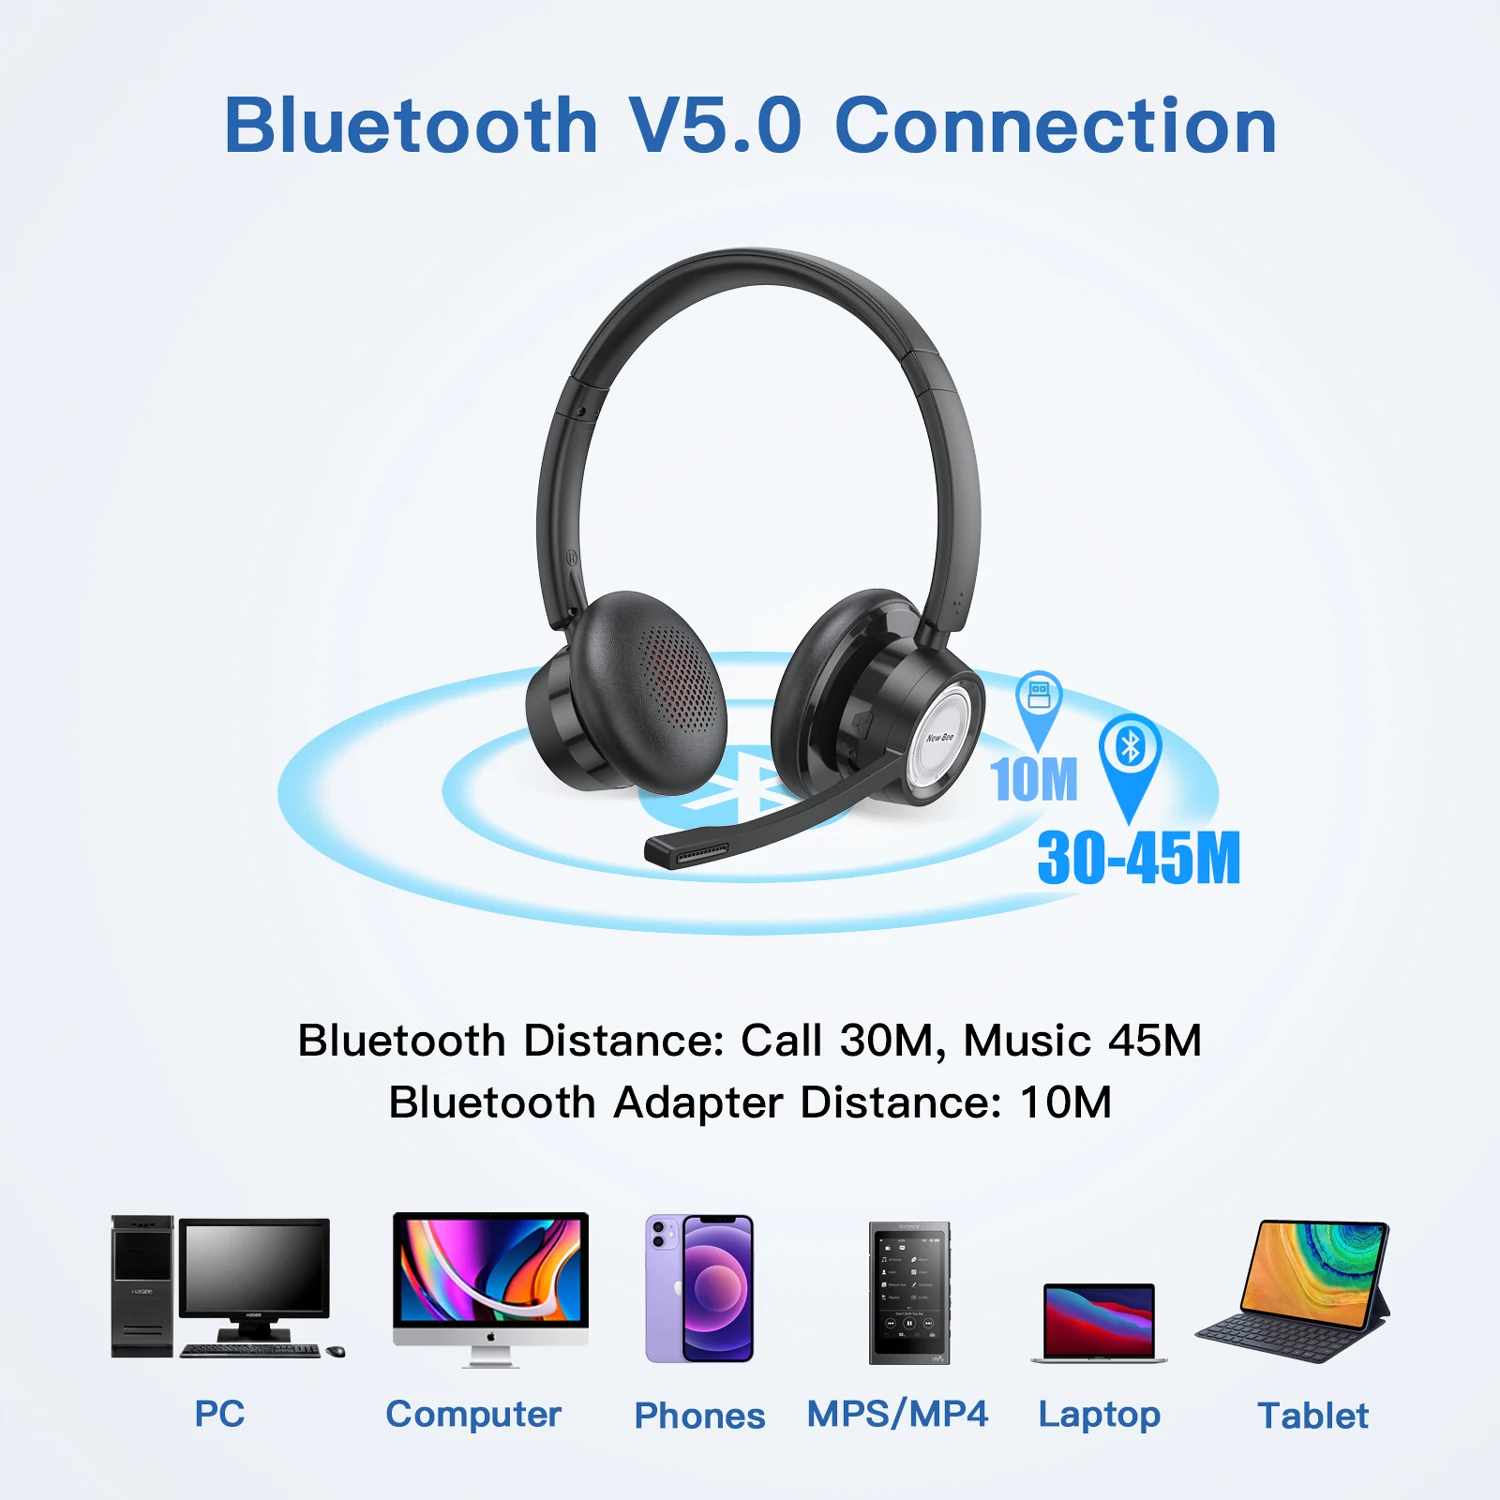 New Bee Bluetooth Earpiece V5.0 User Manual - How to Use and Troubleshoot 